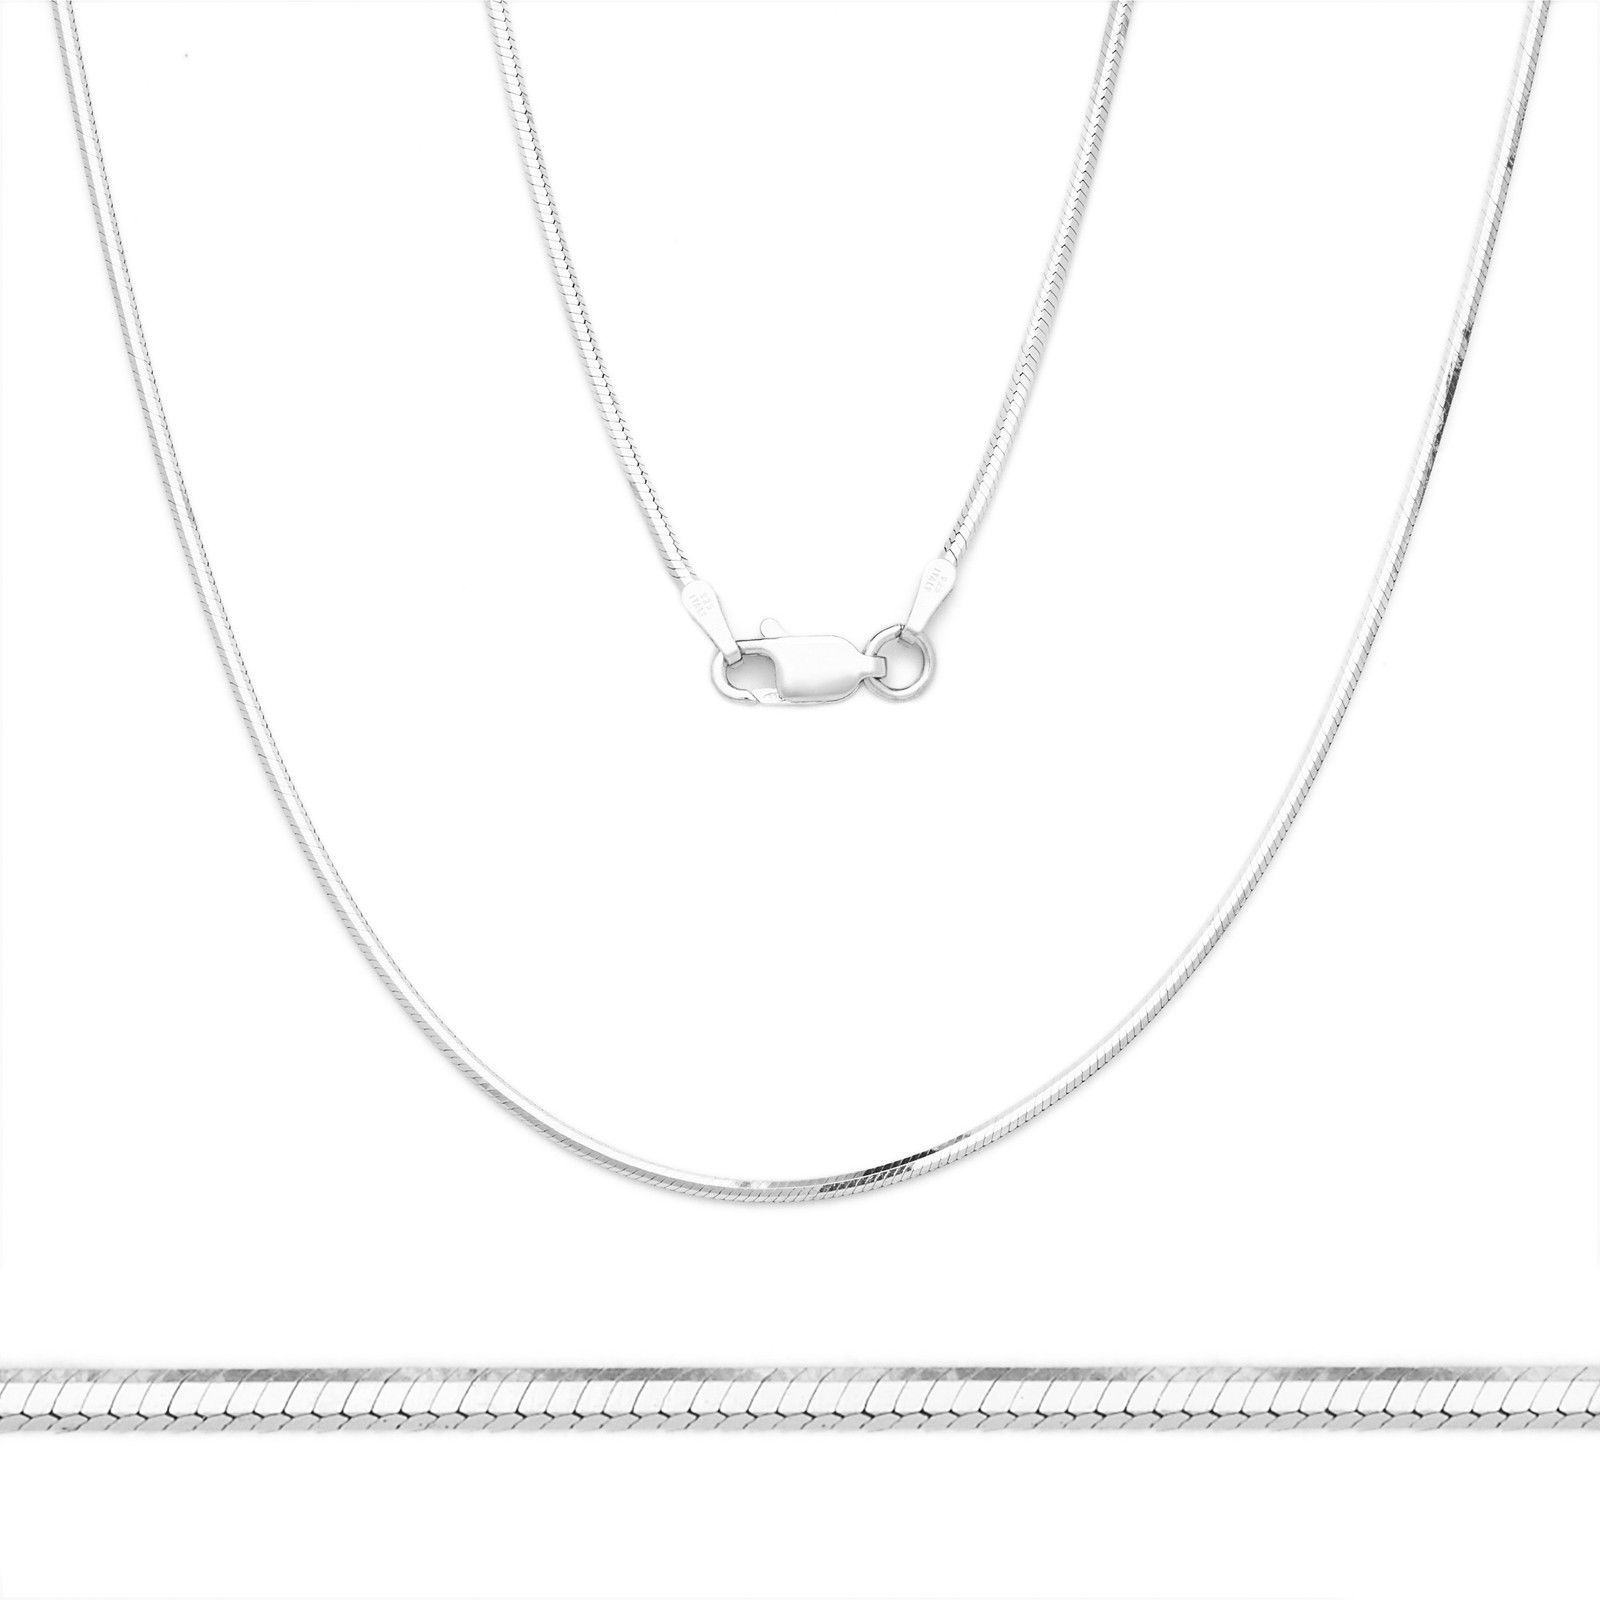 Primary image for Unique Stylish 14K WG 925 Silver Snake Link Italian Chain Necklace 1.2mm